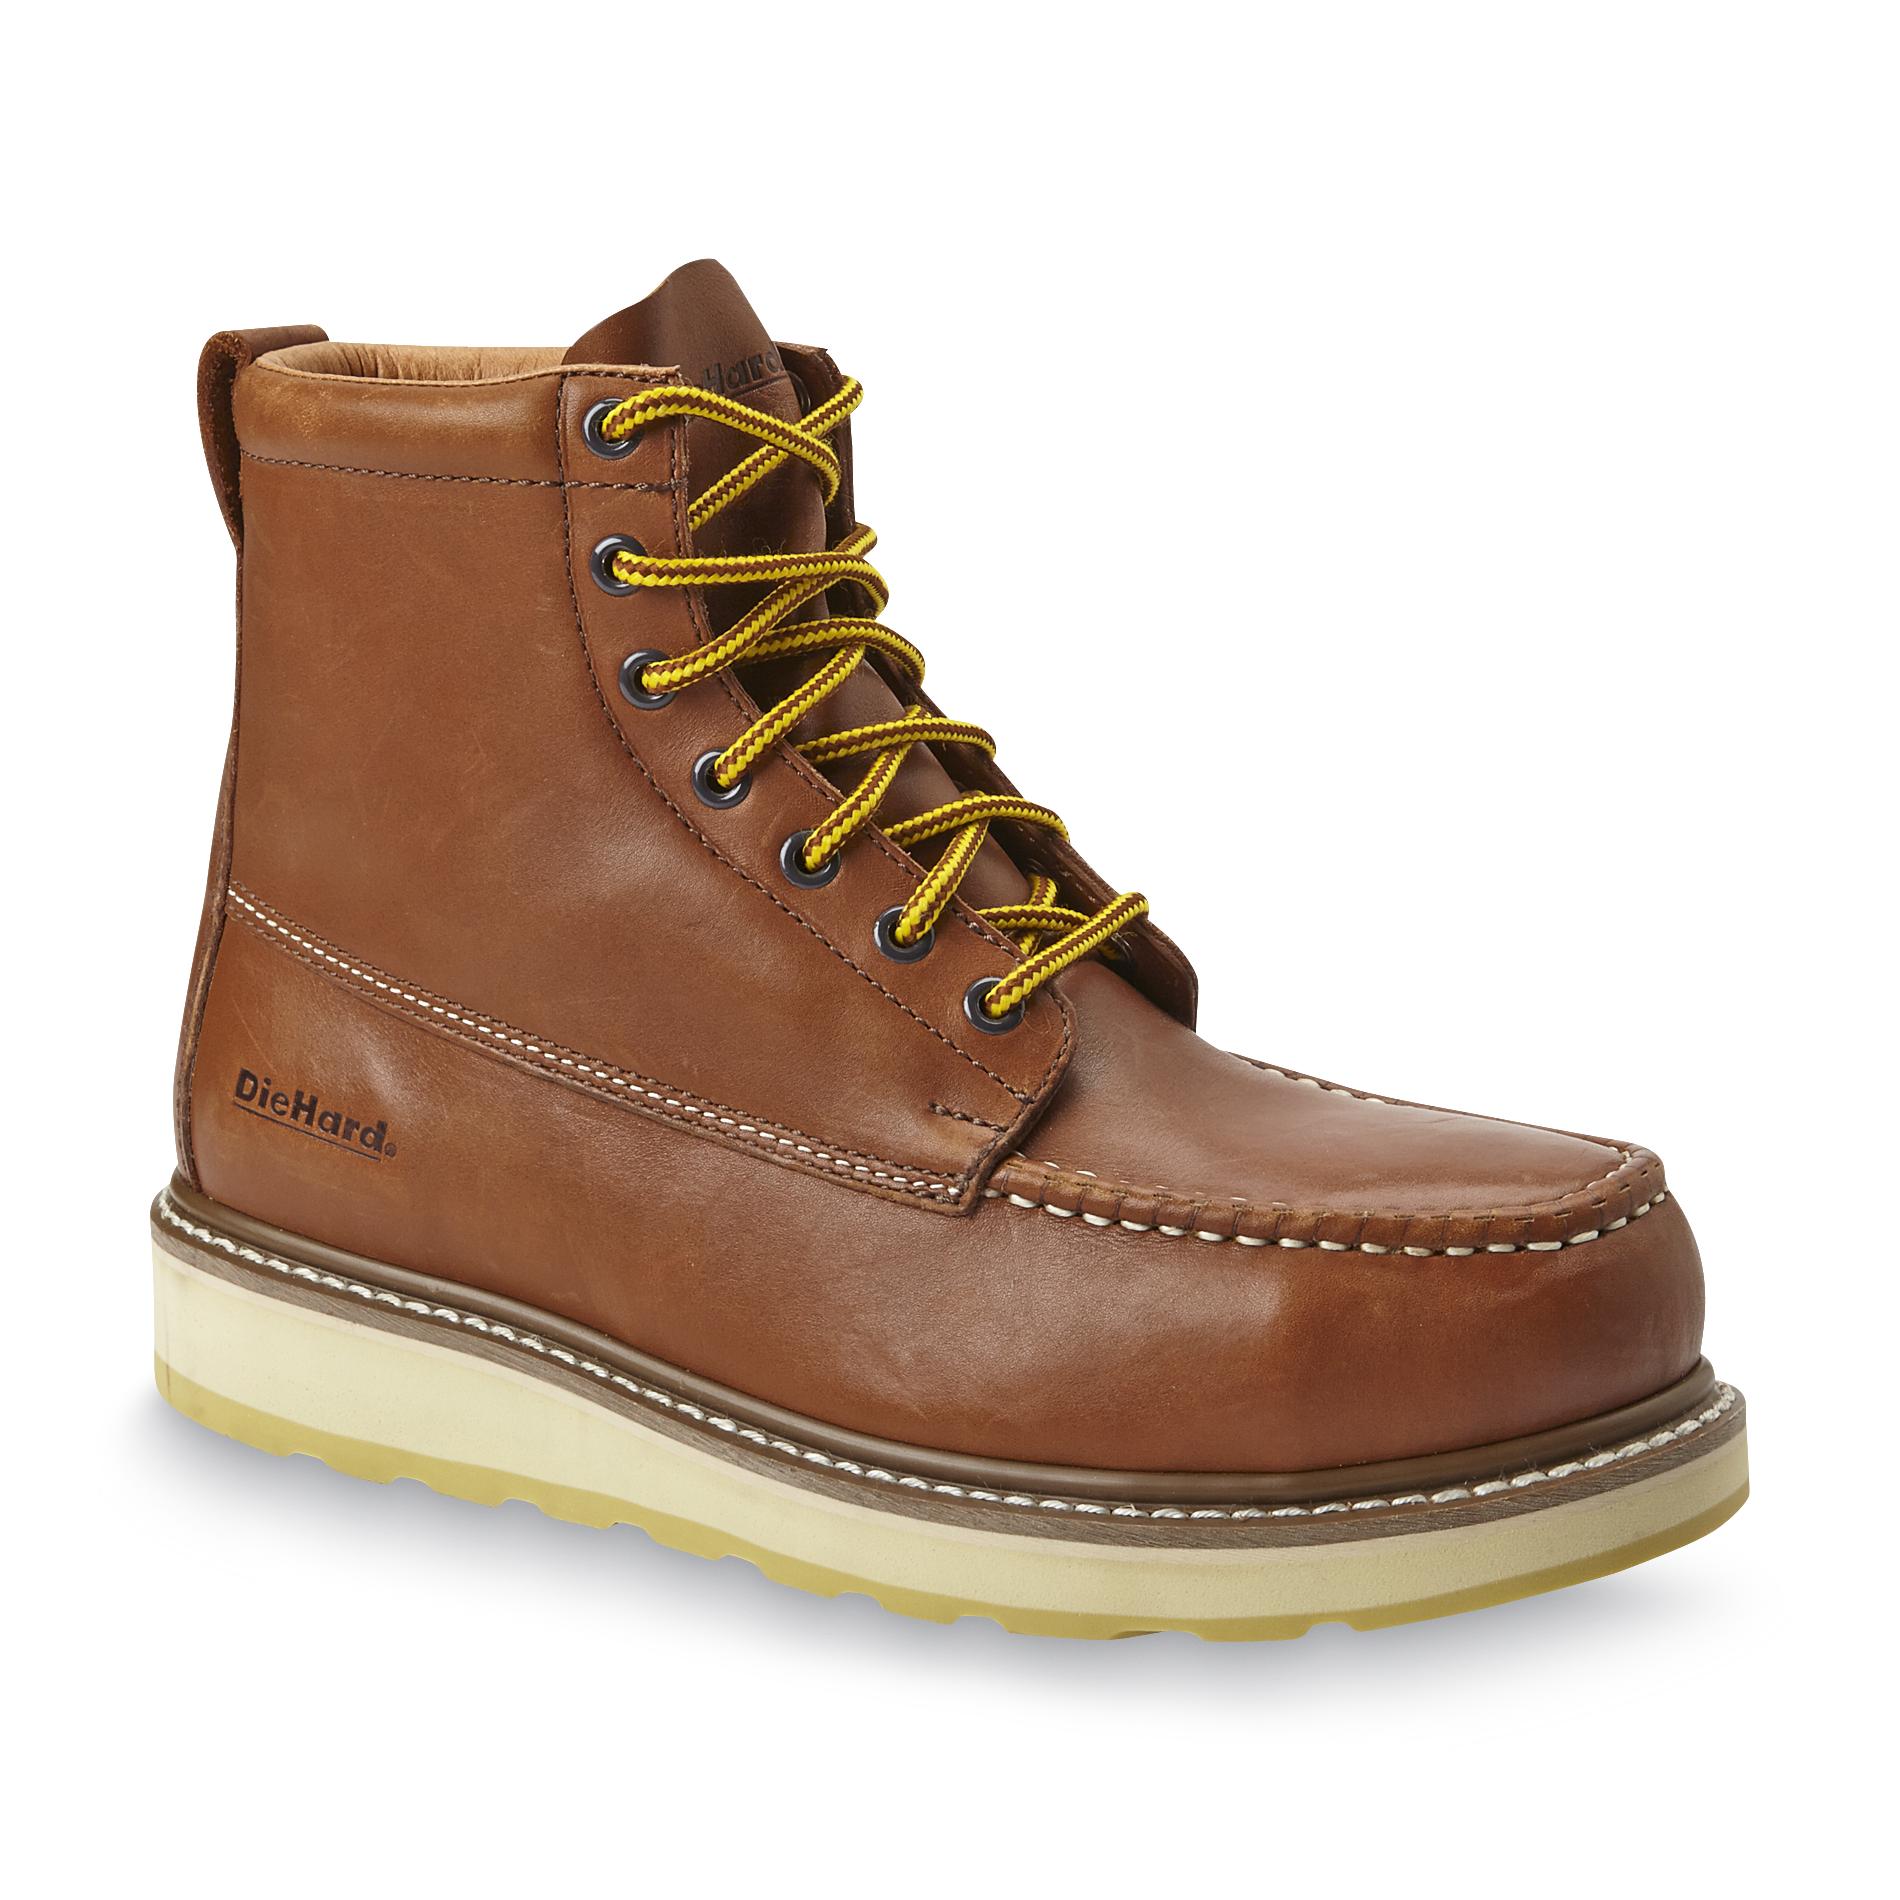 timberland boots at sears